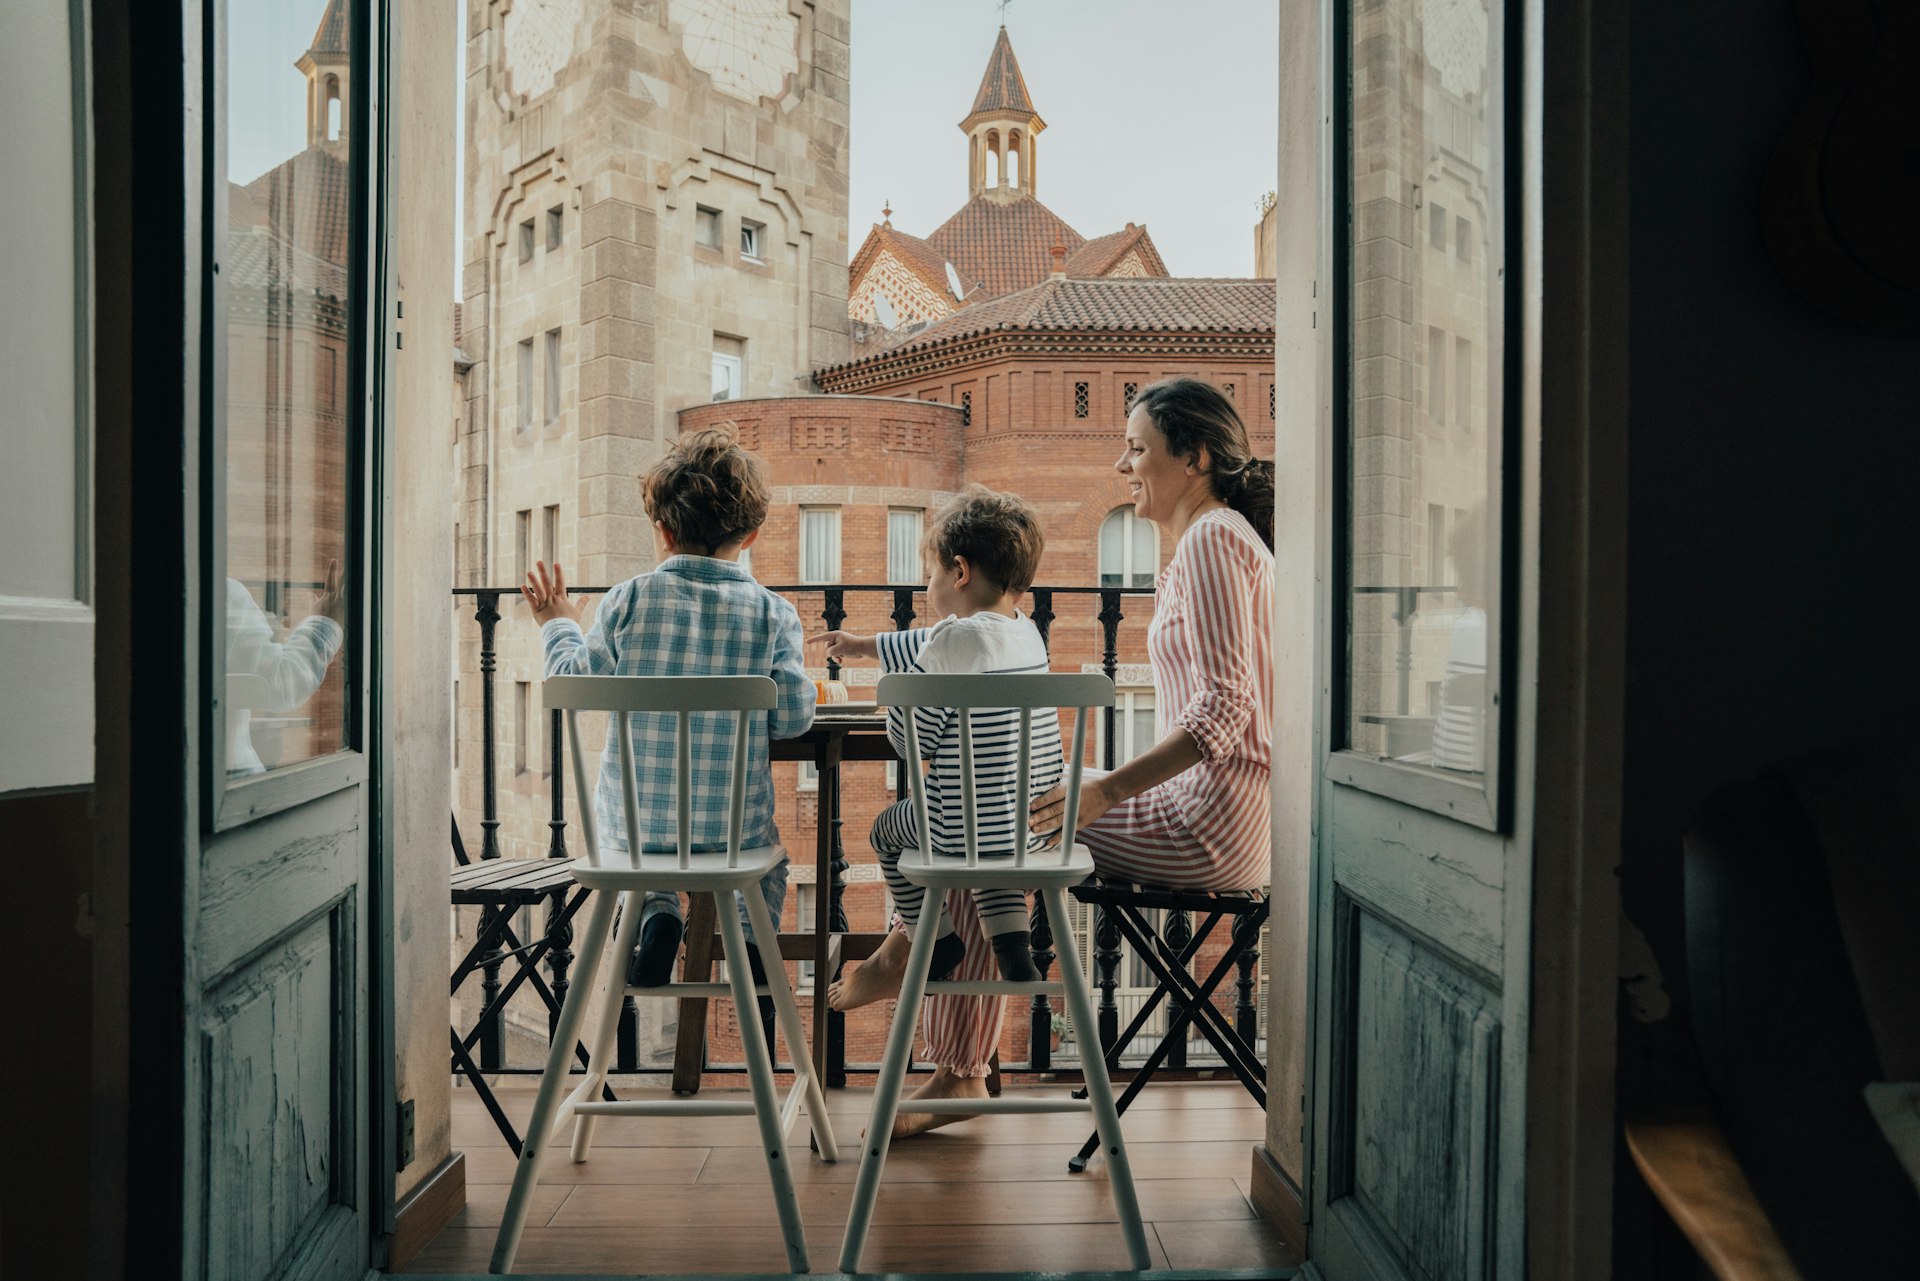 Two small children and their mother sit on a balcony overlooking historic architecture in Barcelona